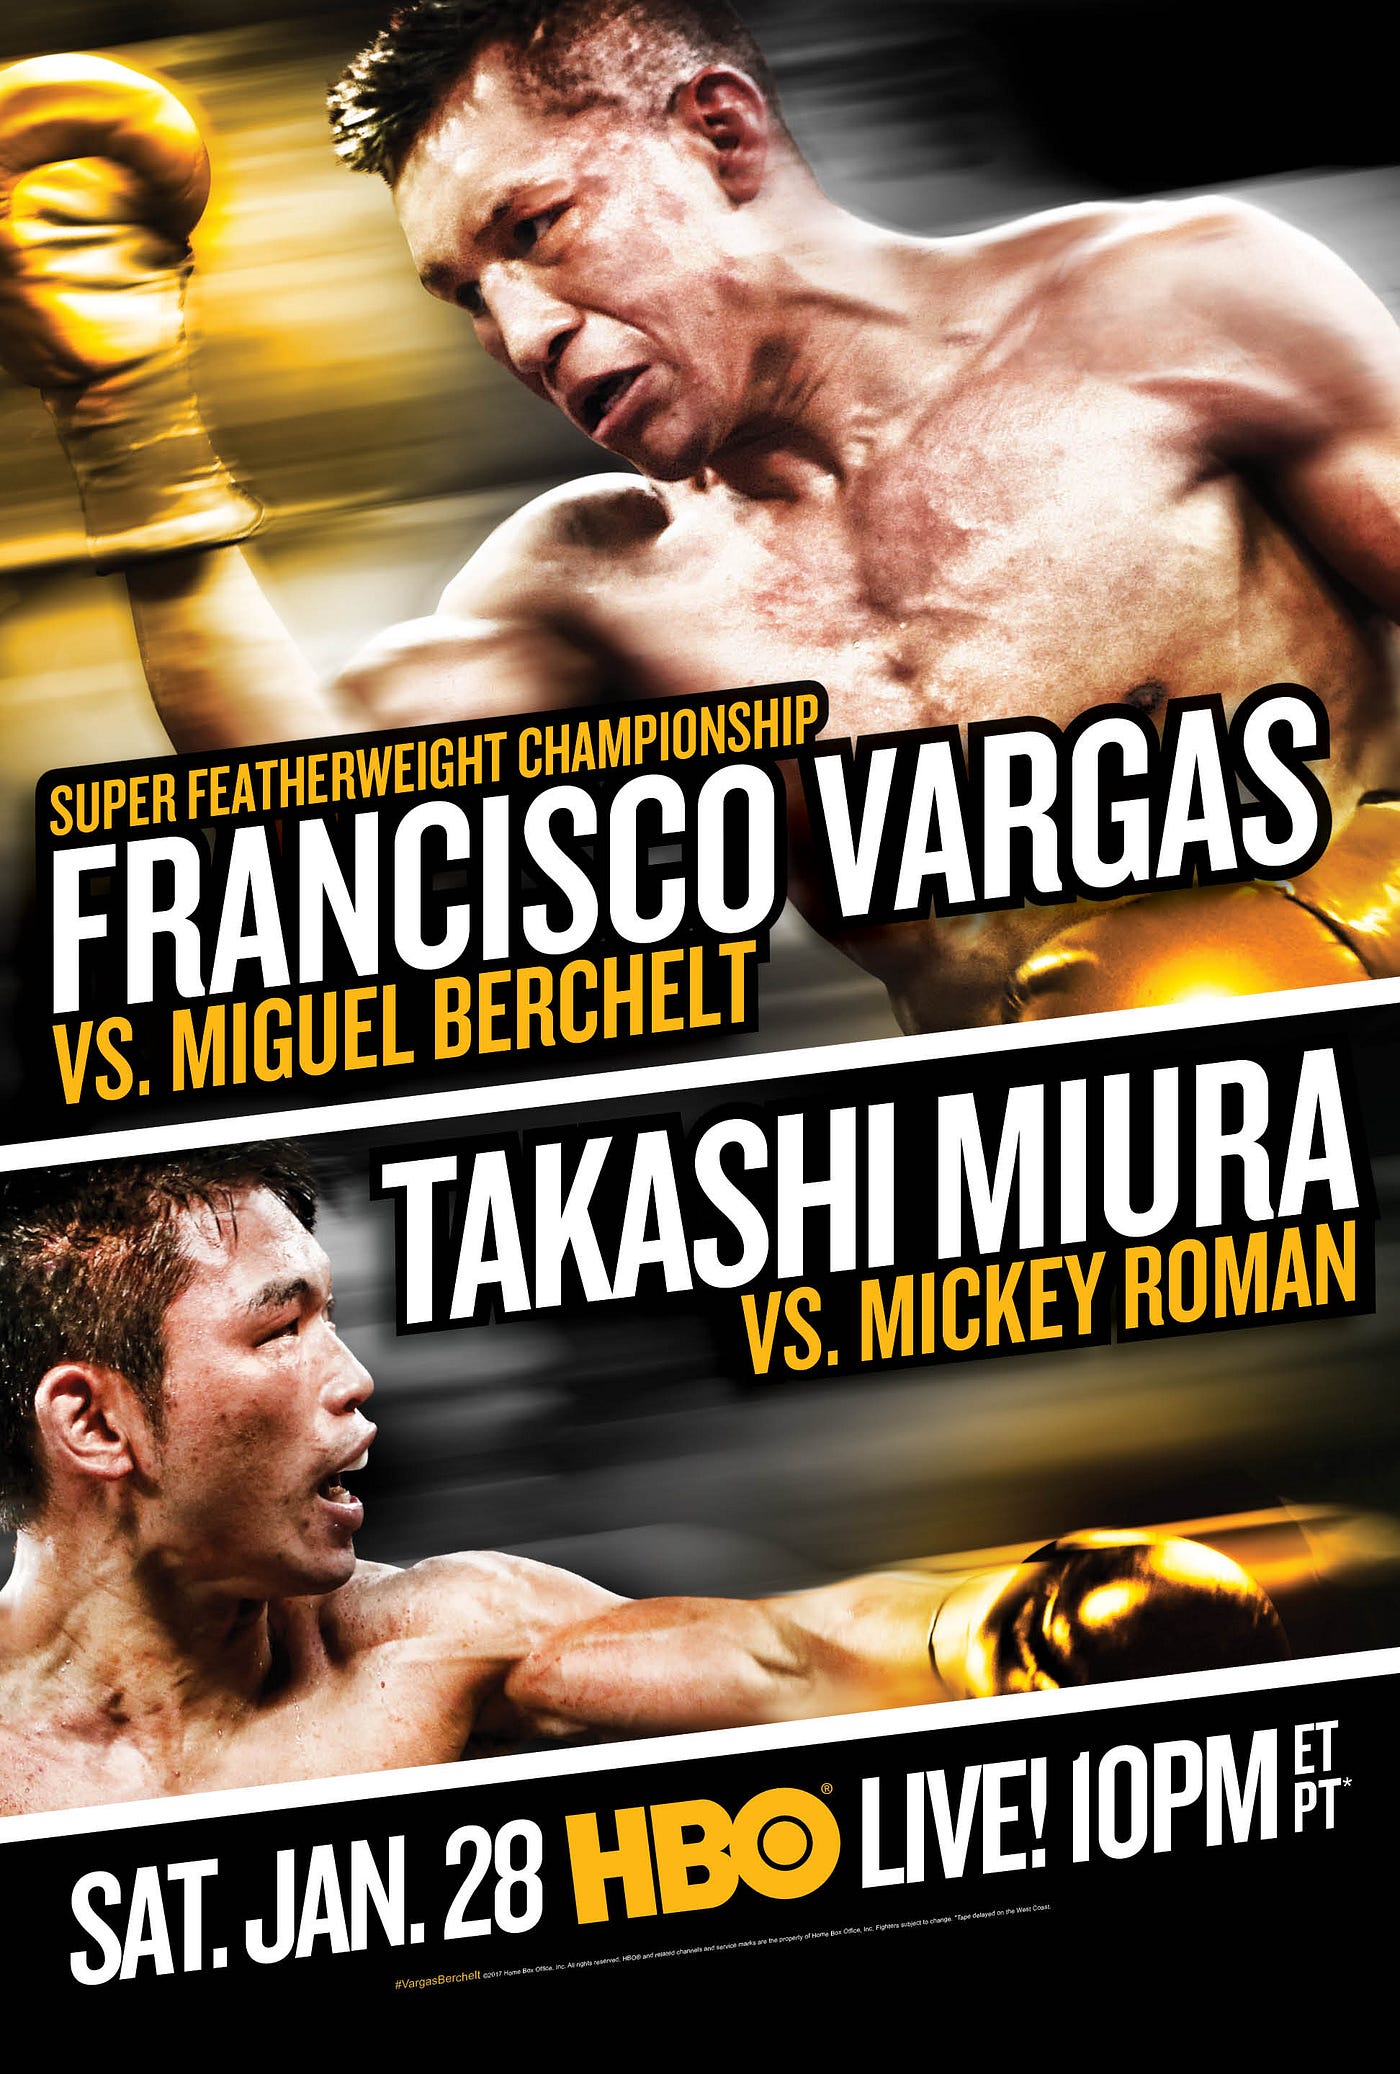 HBO BOXING® OPENS THE NEW YEAR WITH A RED-HOT DOUBLEHEADER WHEN HBO BOXING AFTER DARK® FRANCISCO VARGAS VS. MIGUEL BERCHELT AND TAKASHI MIURA VS